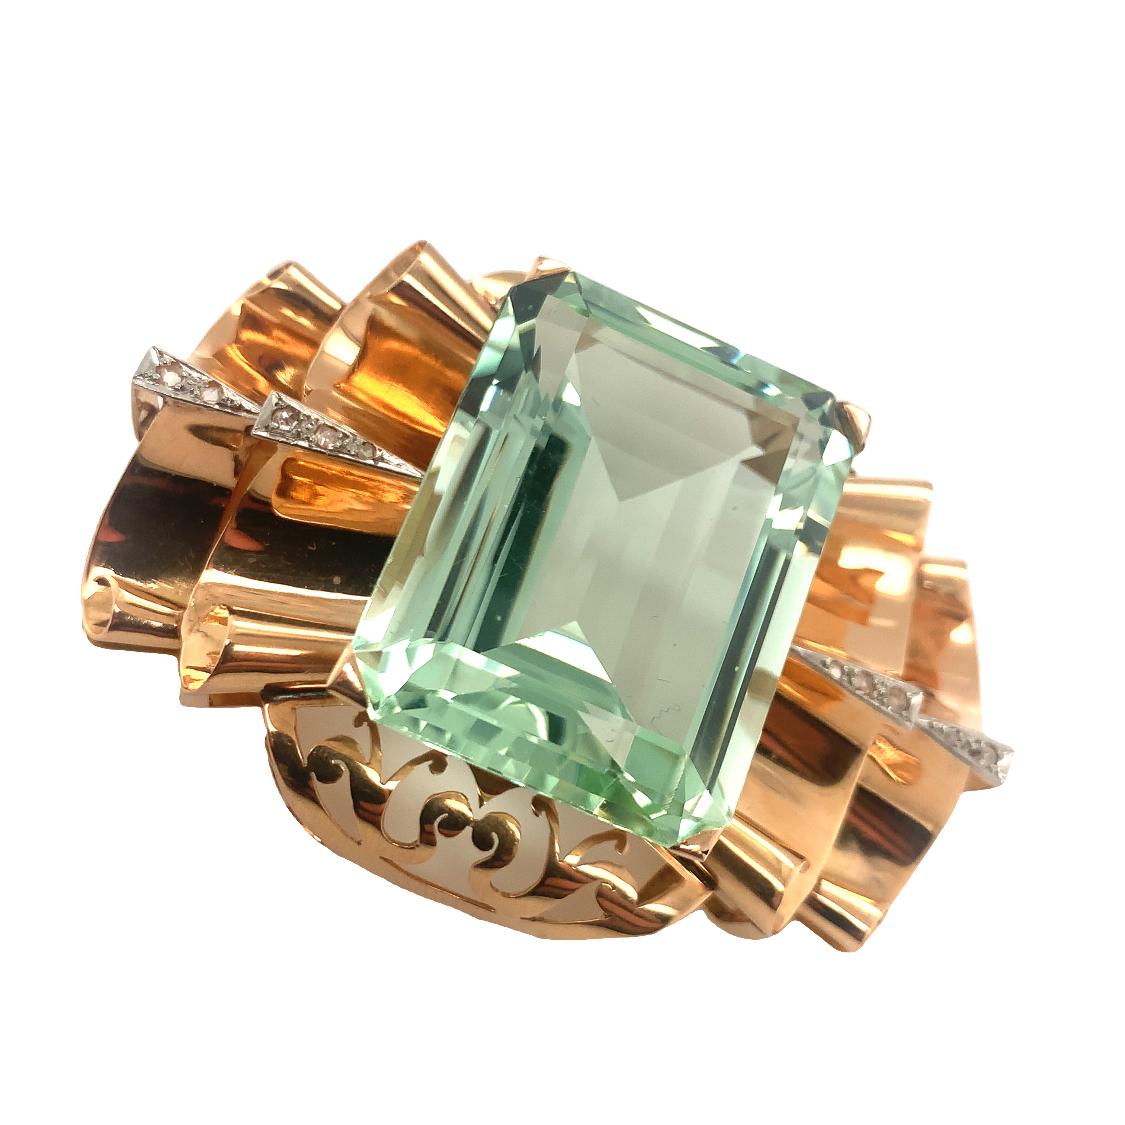 One green beryl and diamond 14K rose gold brooch featuring one impressive emerald step-cut green beryl weighing 90 ct. and 10 rose-cut diamond accents totaling 0.20 ct. Green beryl is aquamarine’s stunning sister gemstone, just in a different shade.